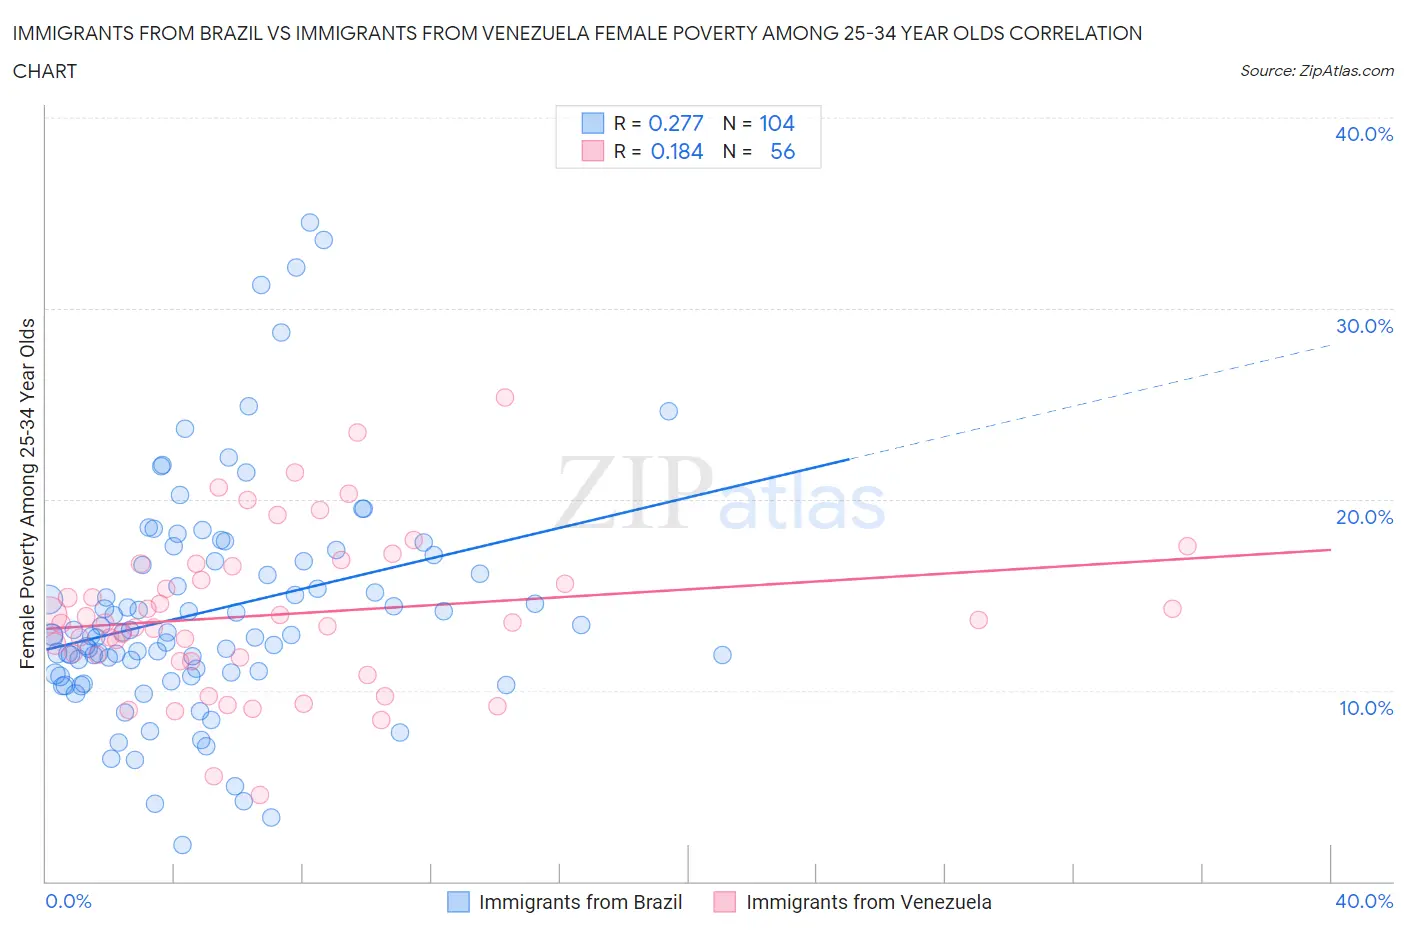 Immigrants from Brazil vs Immigrants from Venezuela Female Poverty Among 25-34 Year Olds